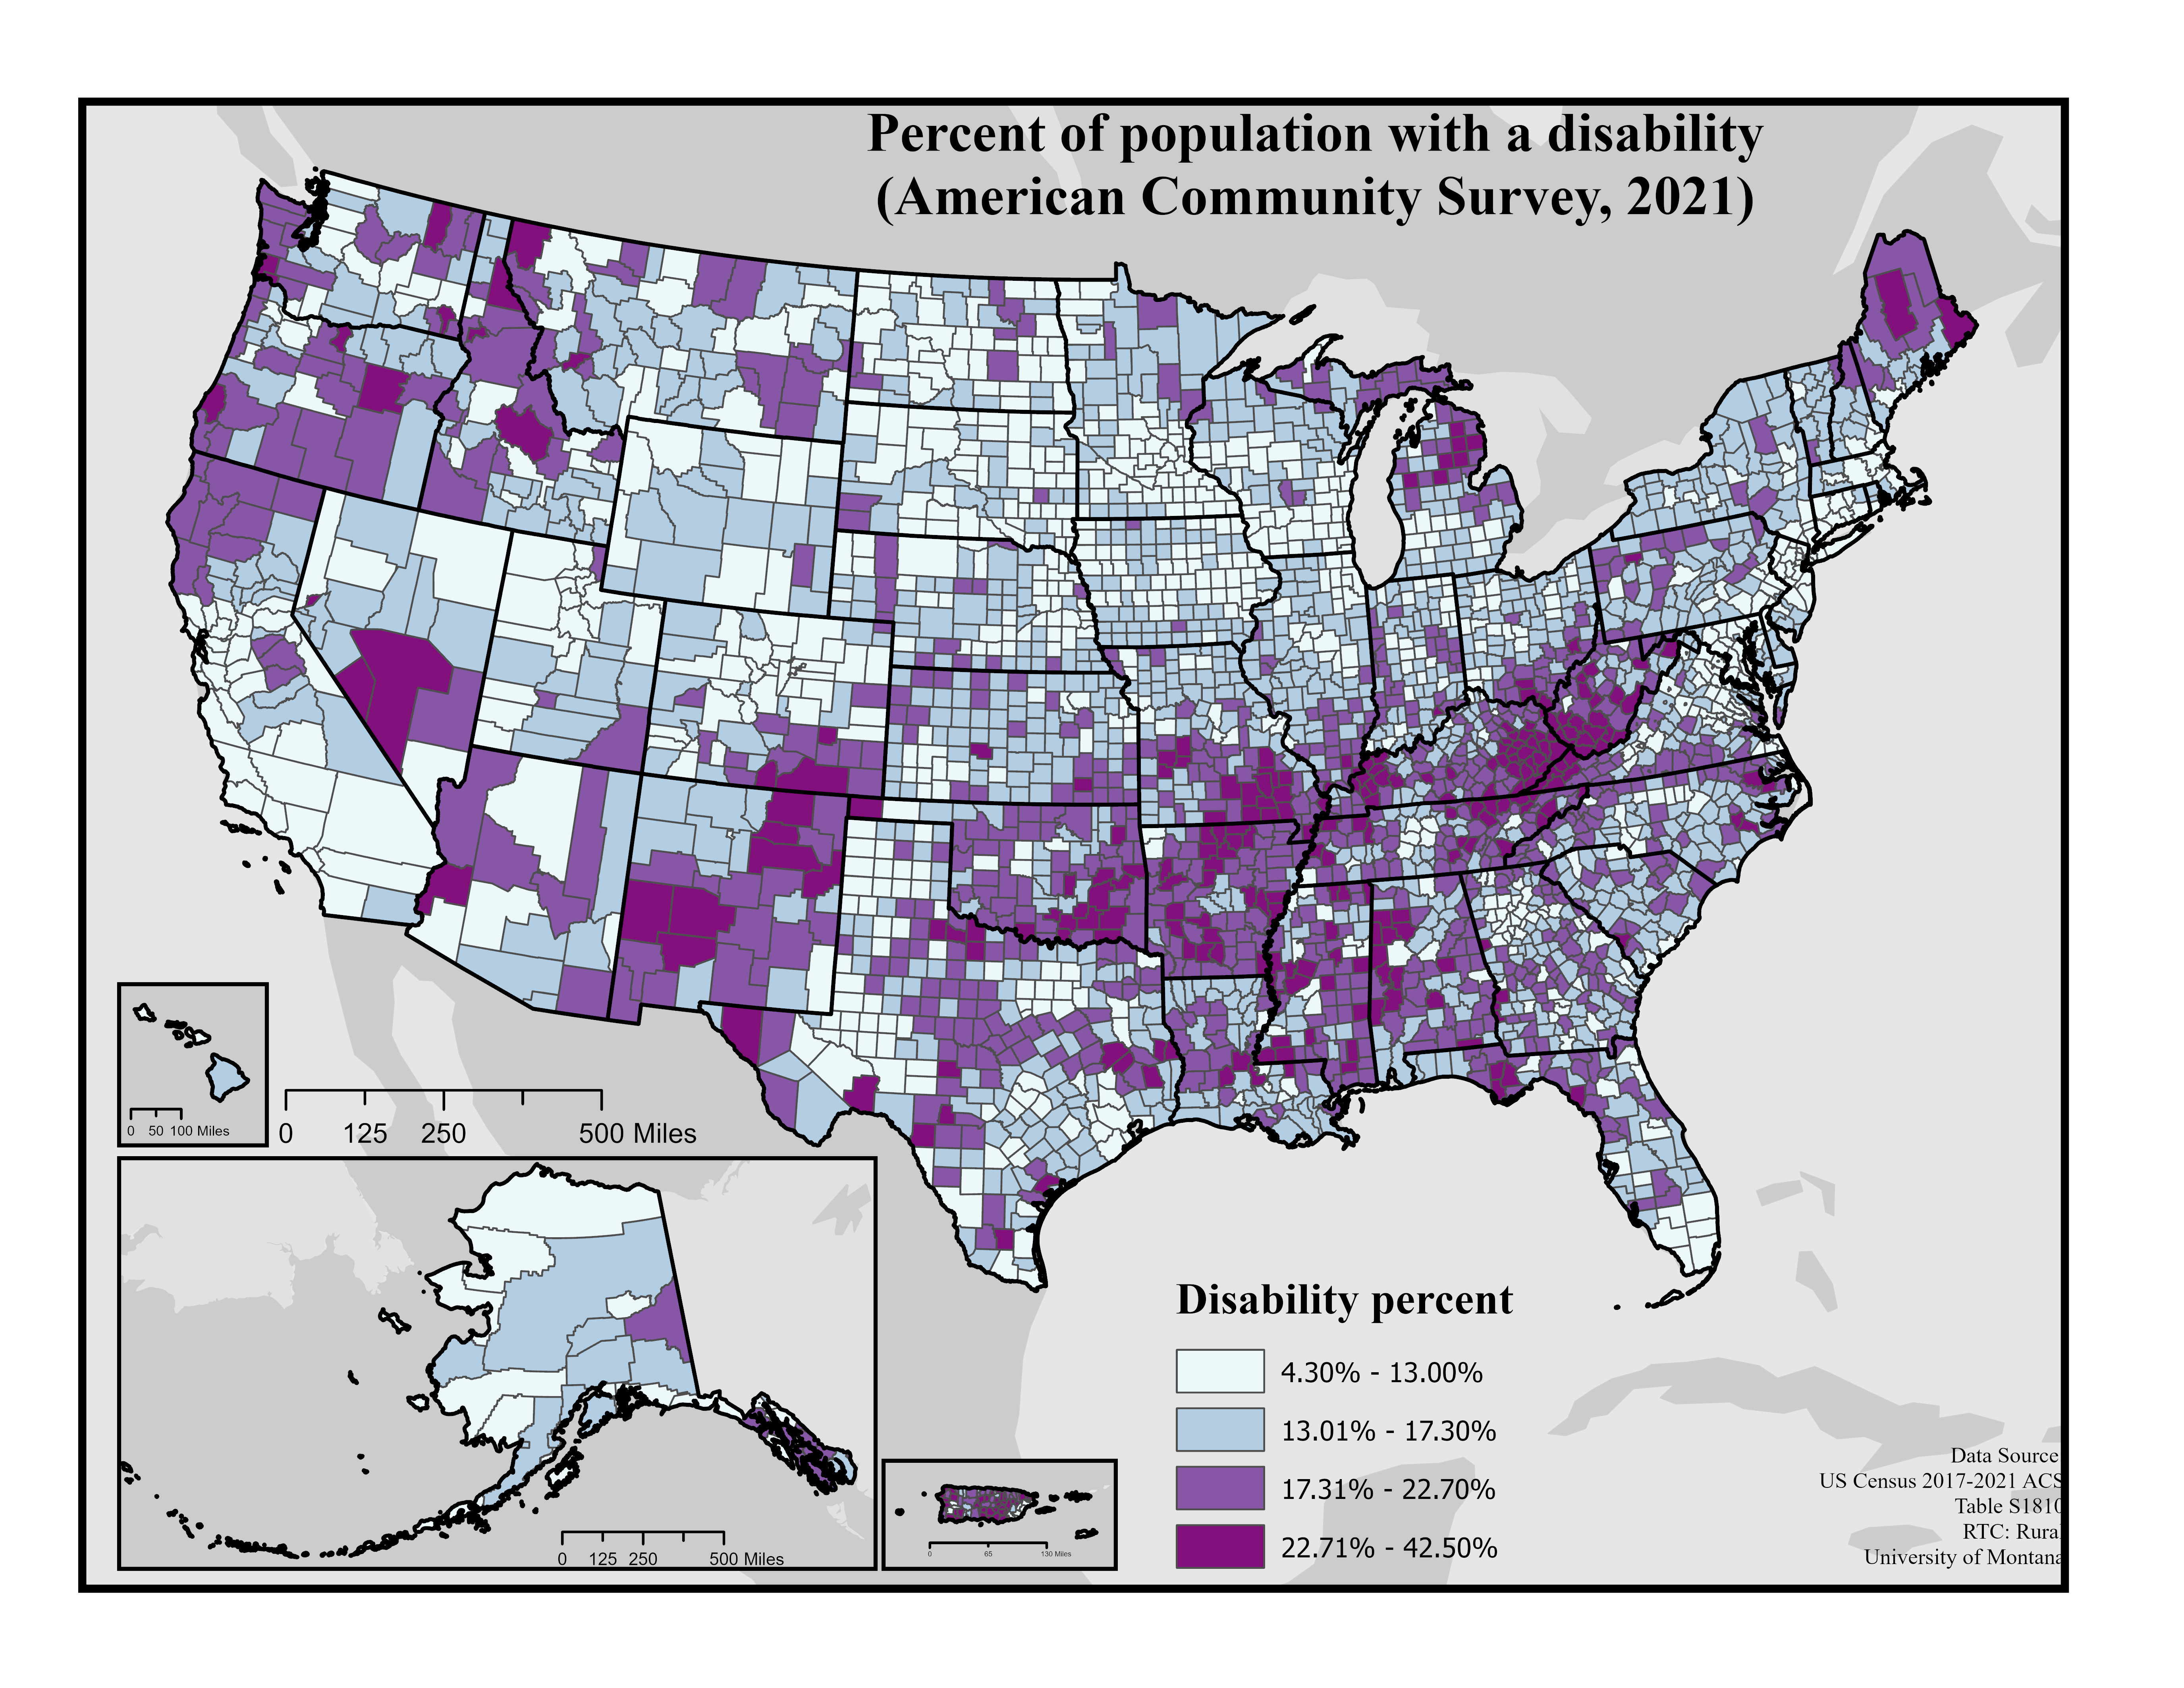 A map of United States counties showing the percentage of people with disabilities in each county in 4 shades of light to dark purple. Counties with percentages of 4.3% to 13% are shaded the lightest, then slightly darker are counties with rates from 13.01% to 17.3%, then slightly darker are counties with rates of 17.31% to 22.7%, the darkest shade of purple is for counties with the highest rates, 22.71% TO 42.5%. Counties with the highest rates of disability are found throughout the country with concentrations in Puerto Rico, Appalachia, Arkansas, Oklahoma, New Mexico, Oregon, Northern Idaho, Northern Maine and northern Michigan.